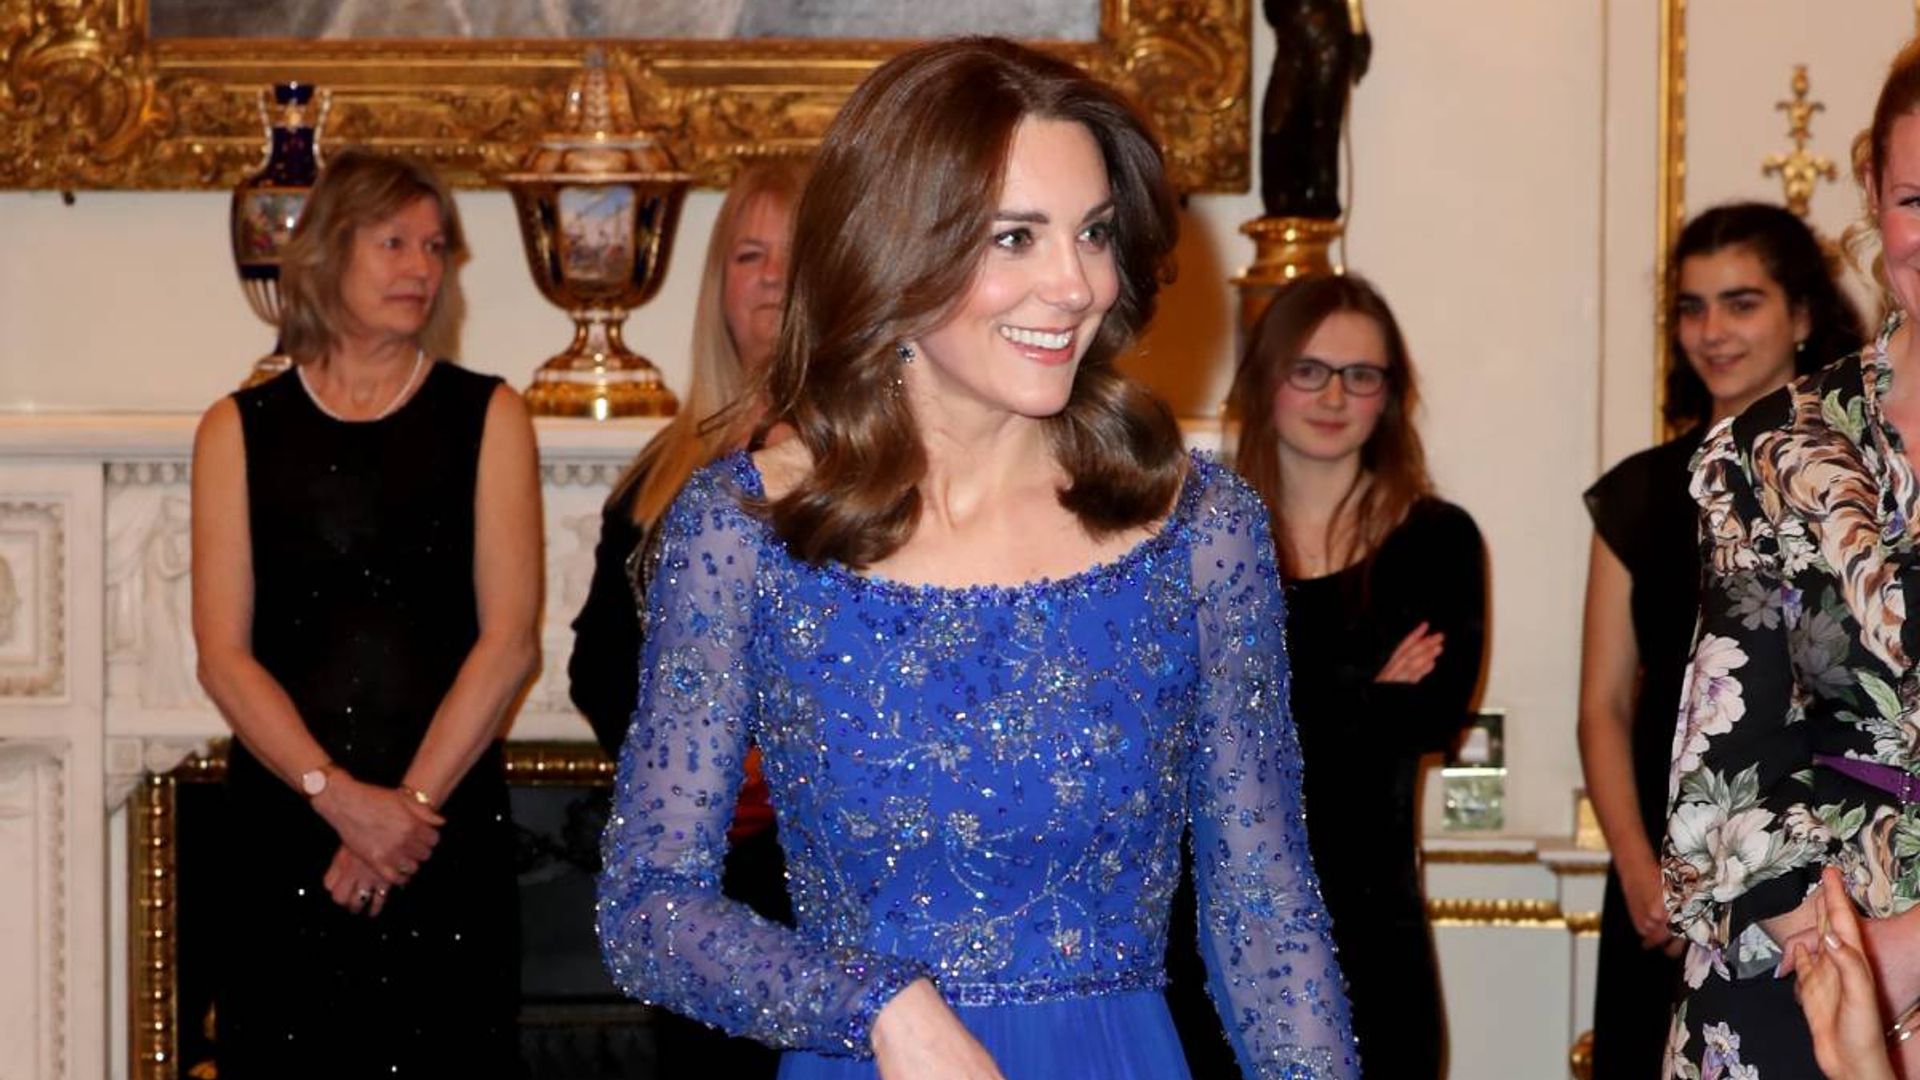 Kate Middleton wows in a glamorous green dress - and wait until